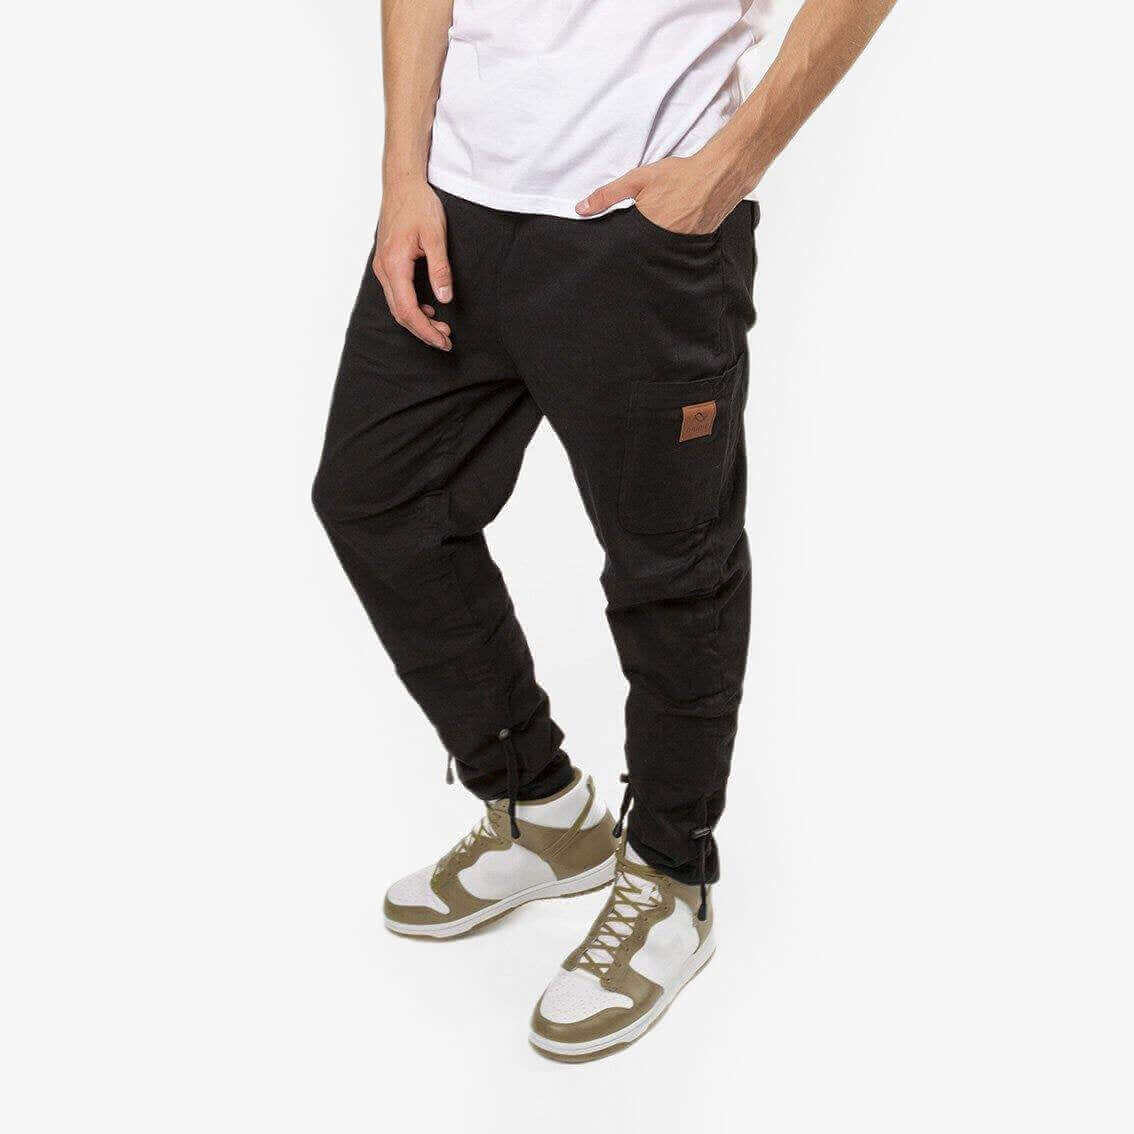 Men's Travel Pants With Adjustable Length / DRiiBE